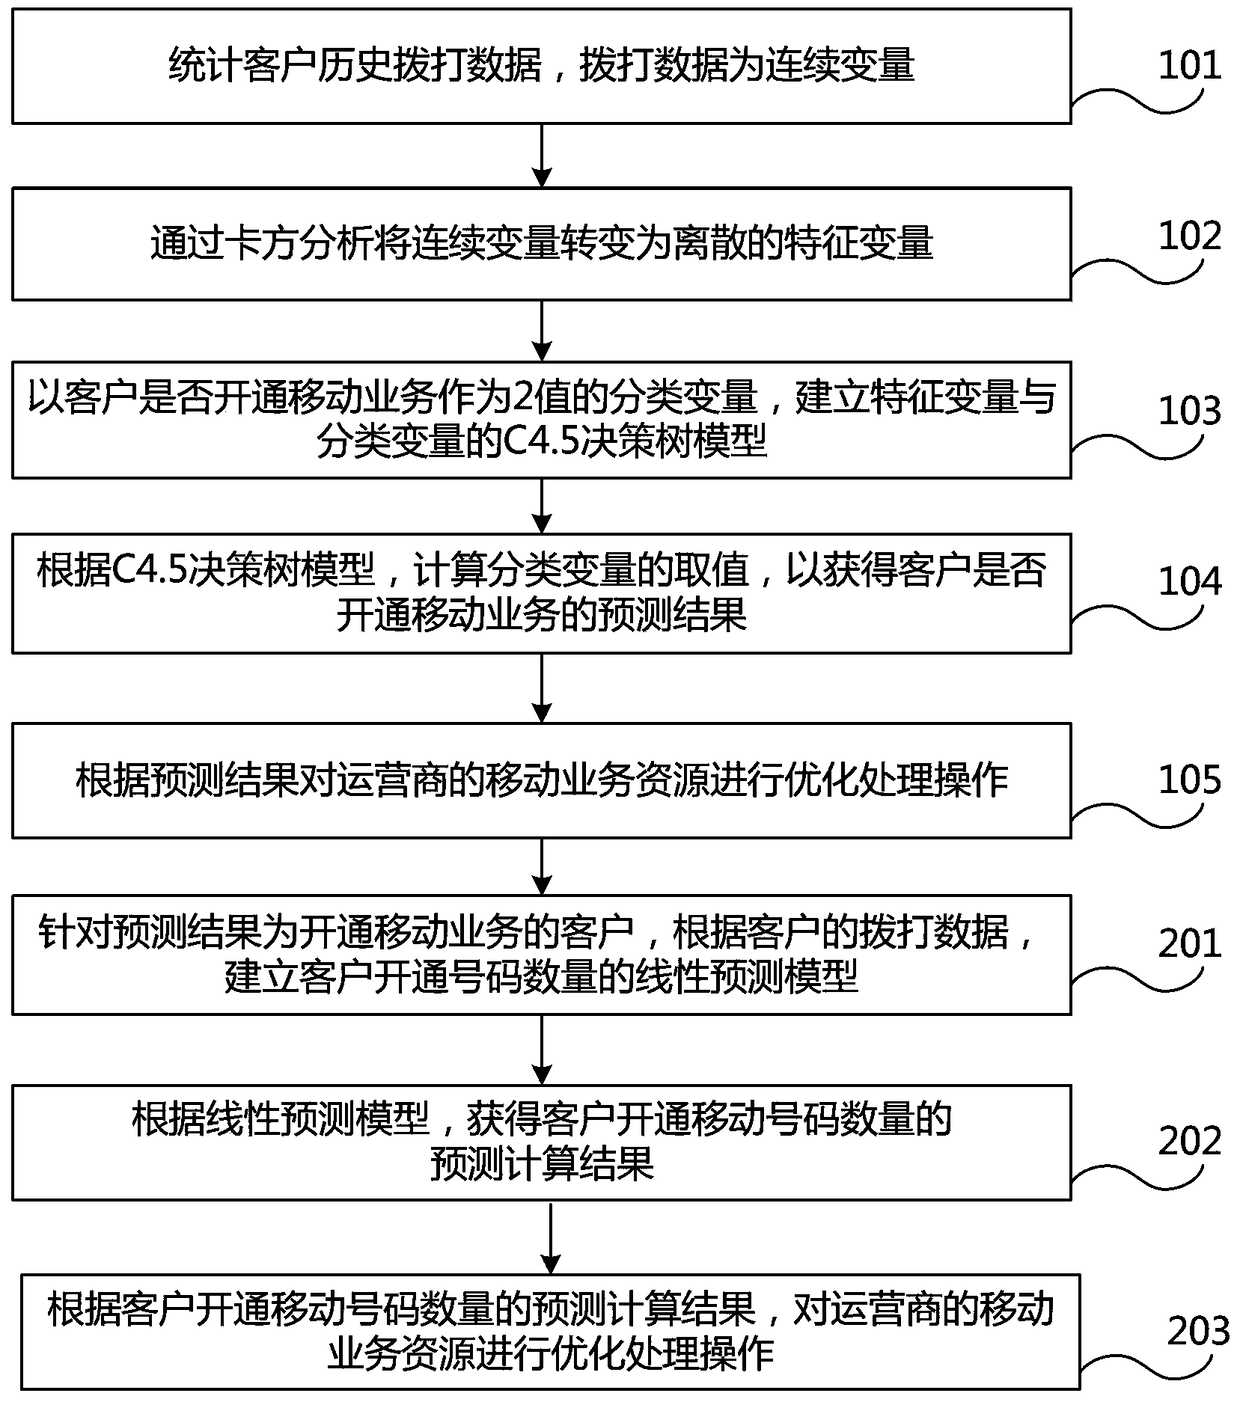 Method and system for optimizing operator's mobile service resources